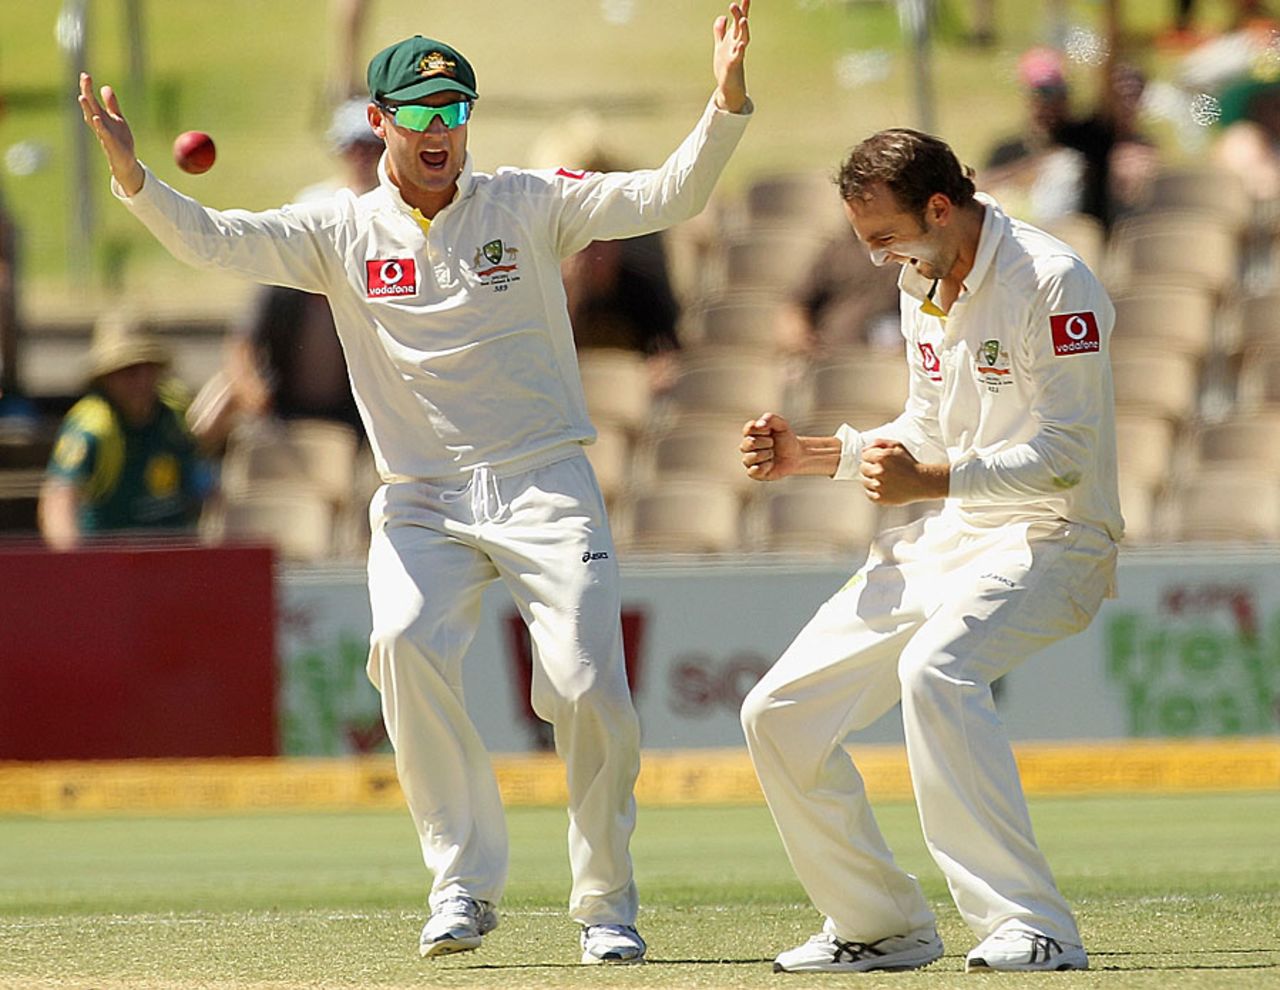 Nathan Lyon and Michael Clarke celebrate after getting rid of Sachin Tendulkar, Australia v India, 4th Test, Adelaide, 4th day, January 27, 2012